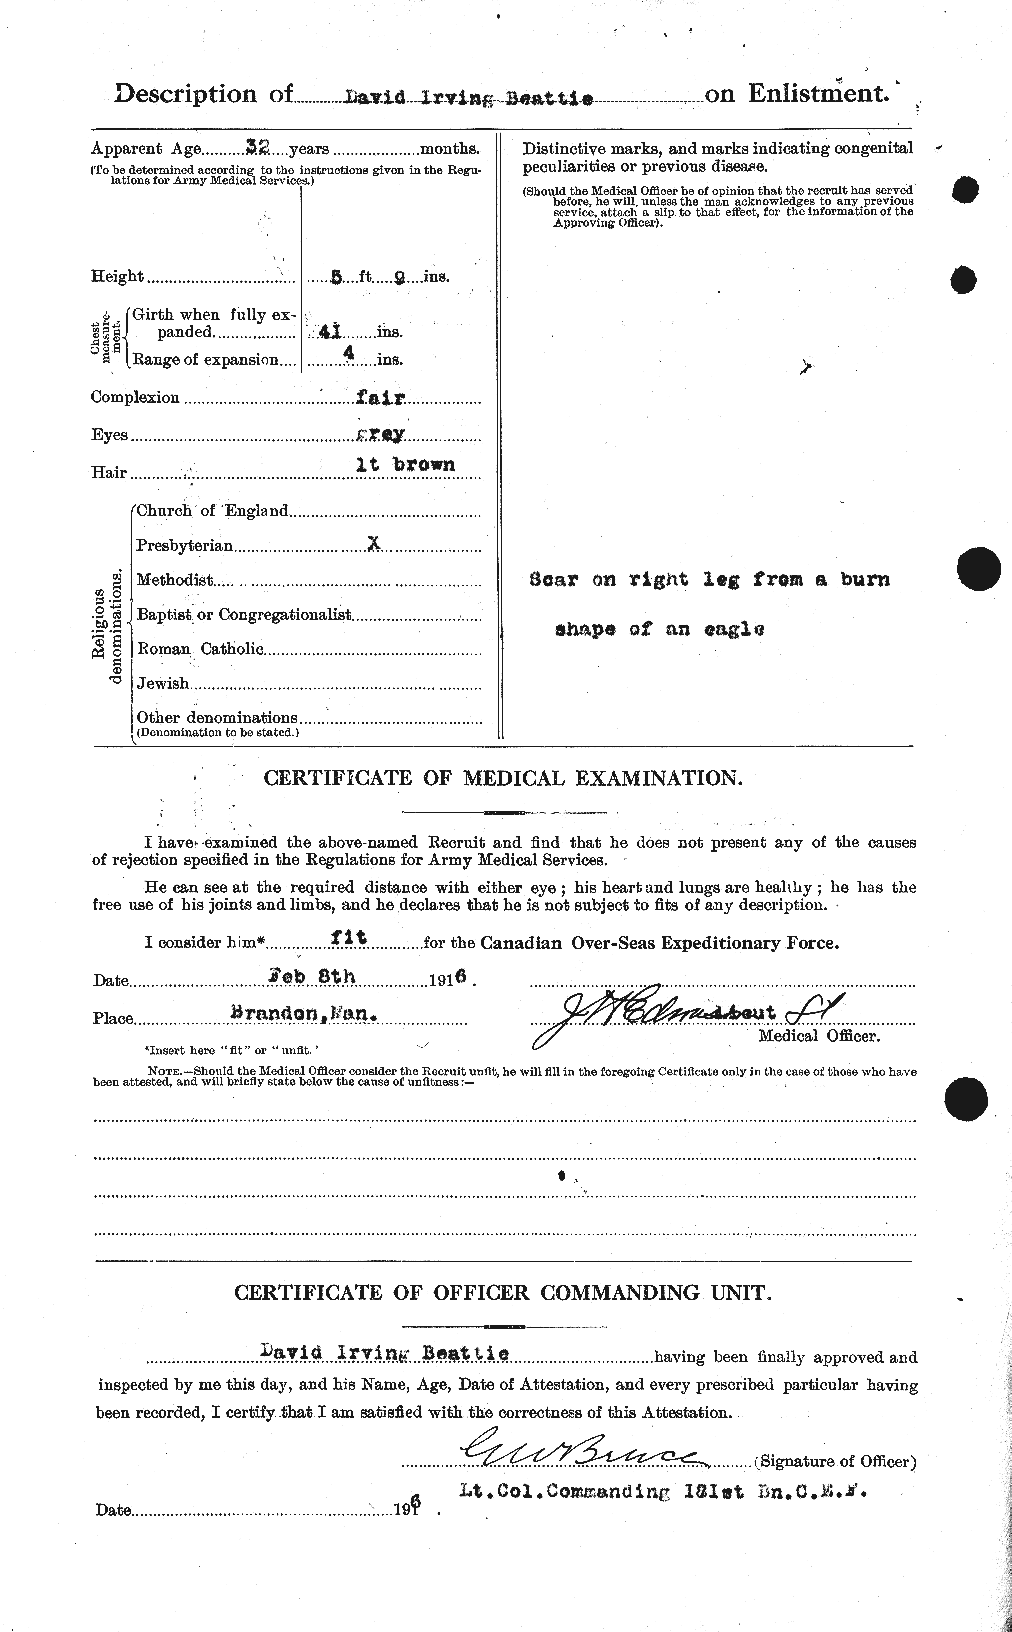 Personnel Records of the First World War - CEF 230668b